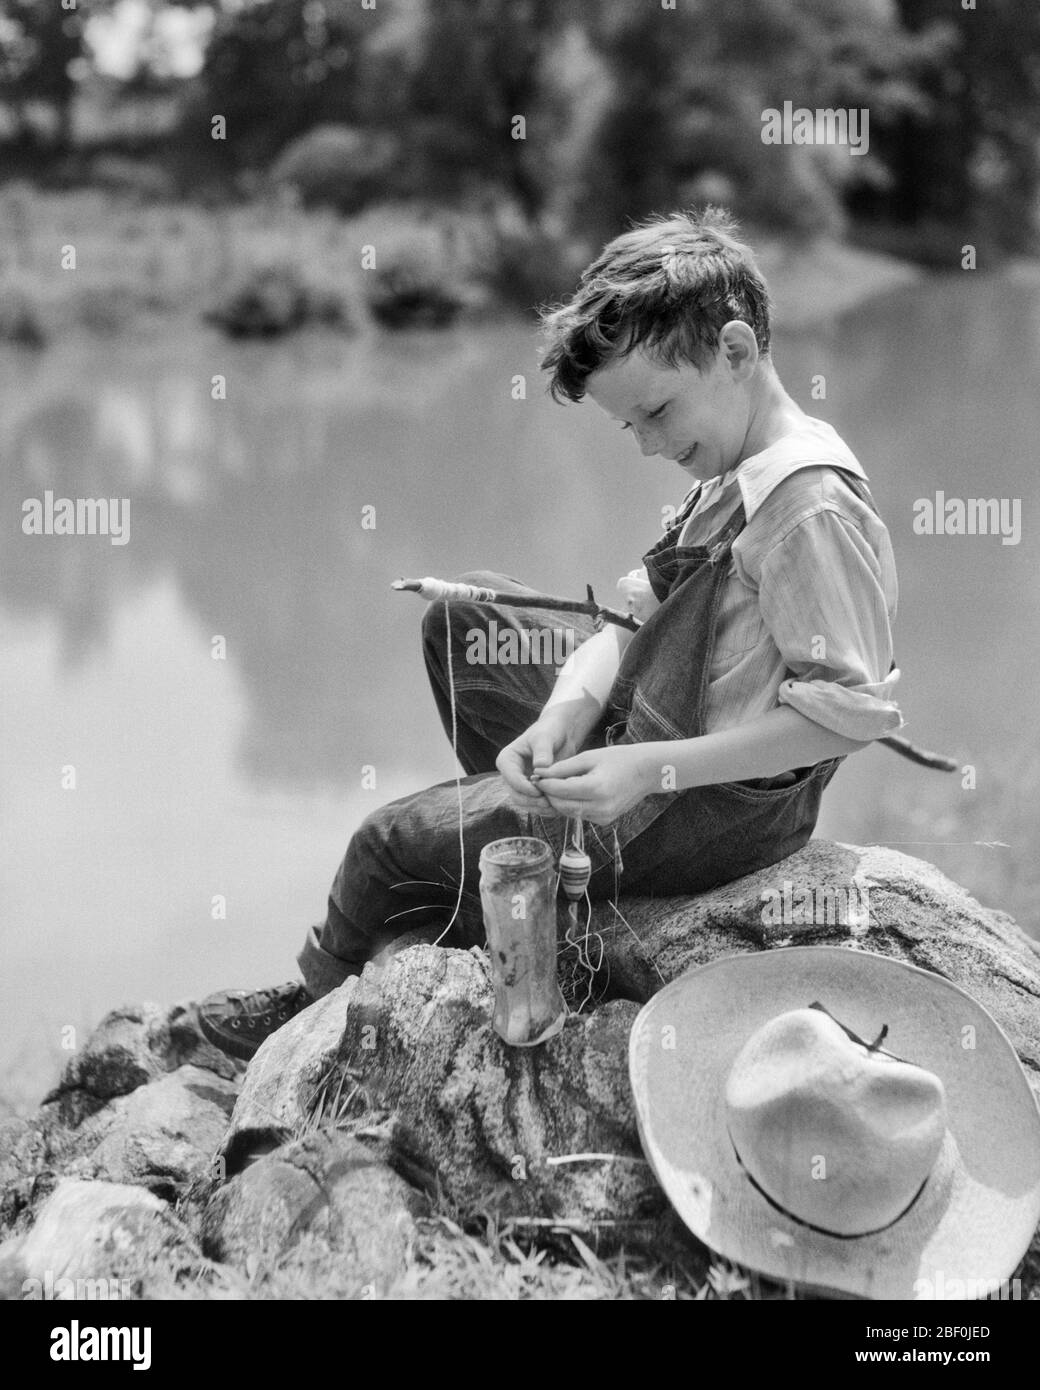 1930s SMILING YOUNG BOY SITTING ON ROCK BY STREAM PUTTING BAIT ON HOOK AND  LINE OF FISHING ROD MADE FROM A STICK - a2490 HAR001 HARS ROD DENIM B&W  SUMMERTIME SKILL ACTIVITY